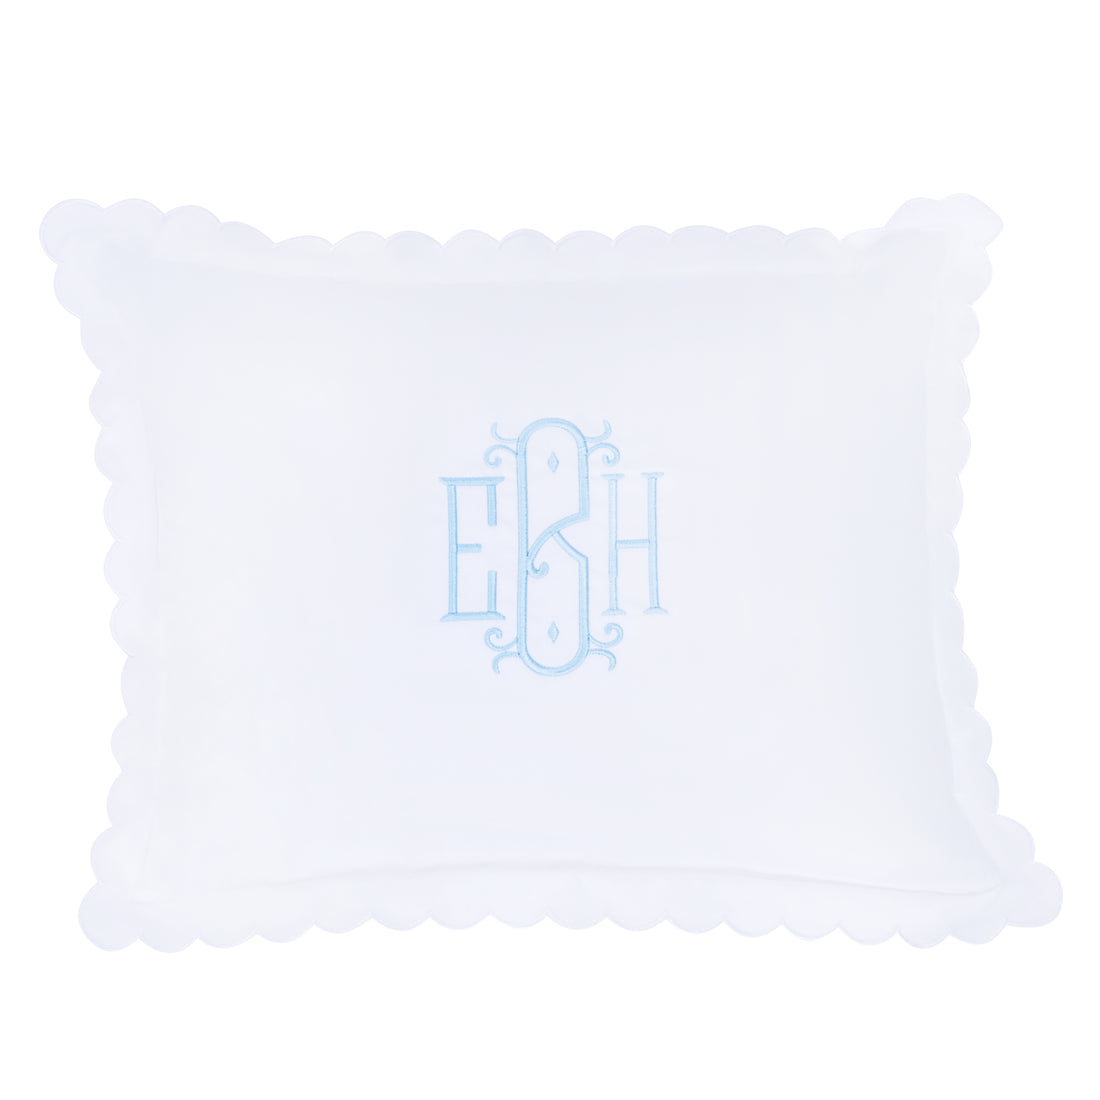 Little English baby pillow case with scallop edge trimmed in white embroidery, nursery goods for baby